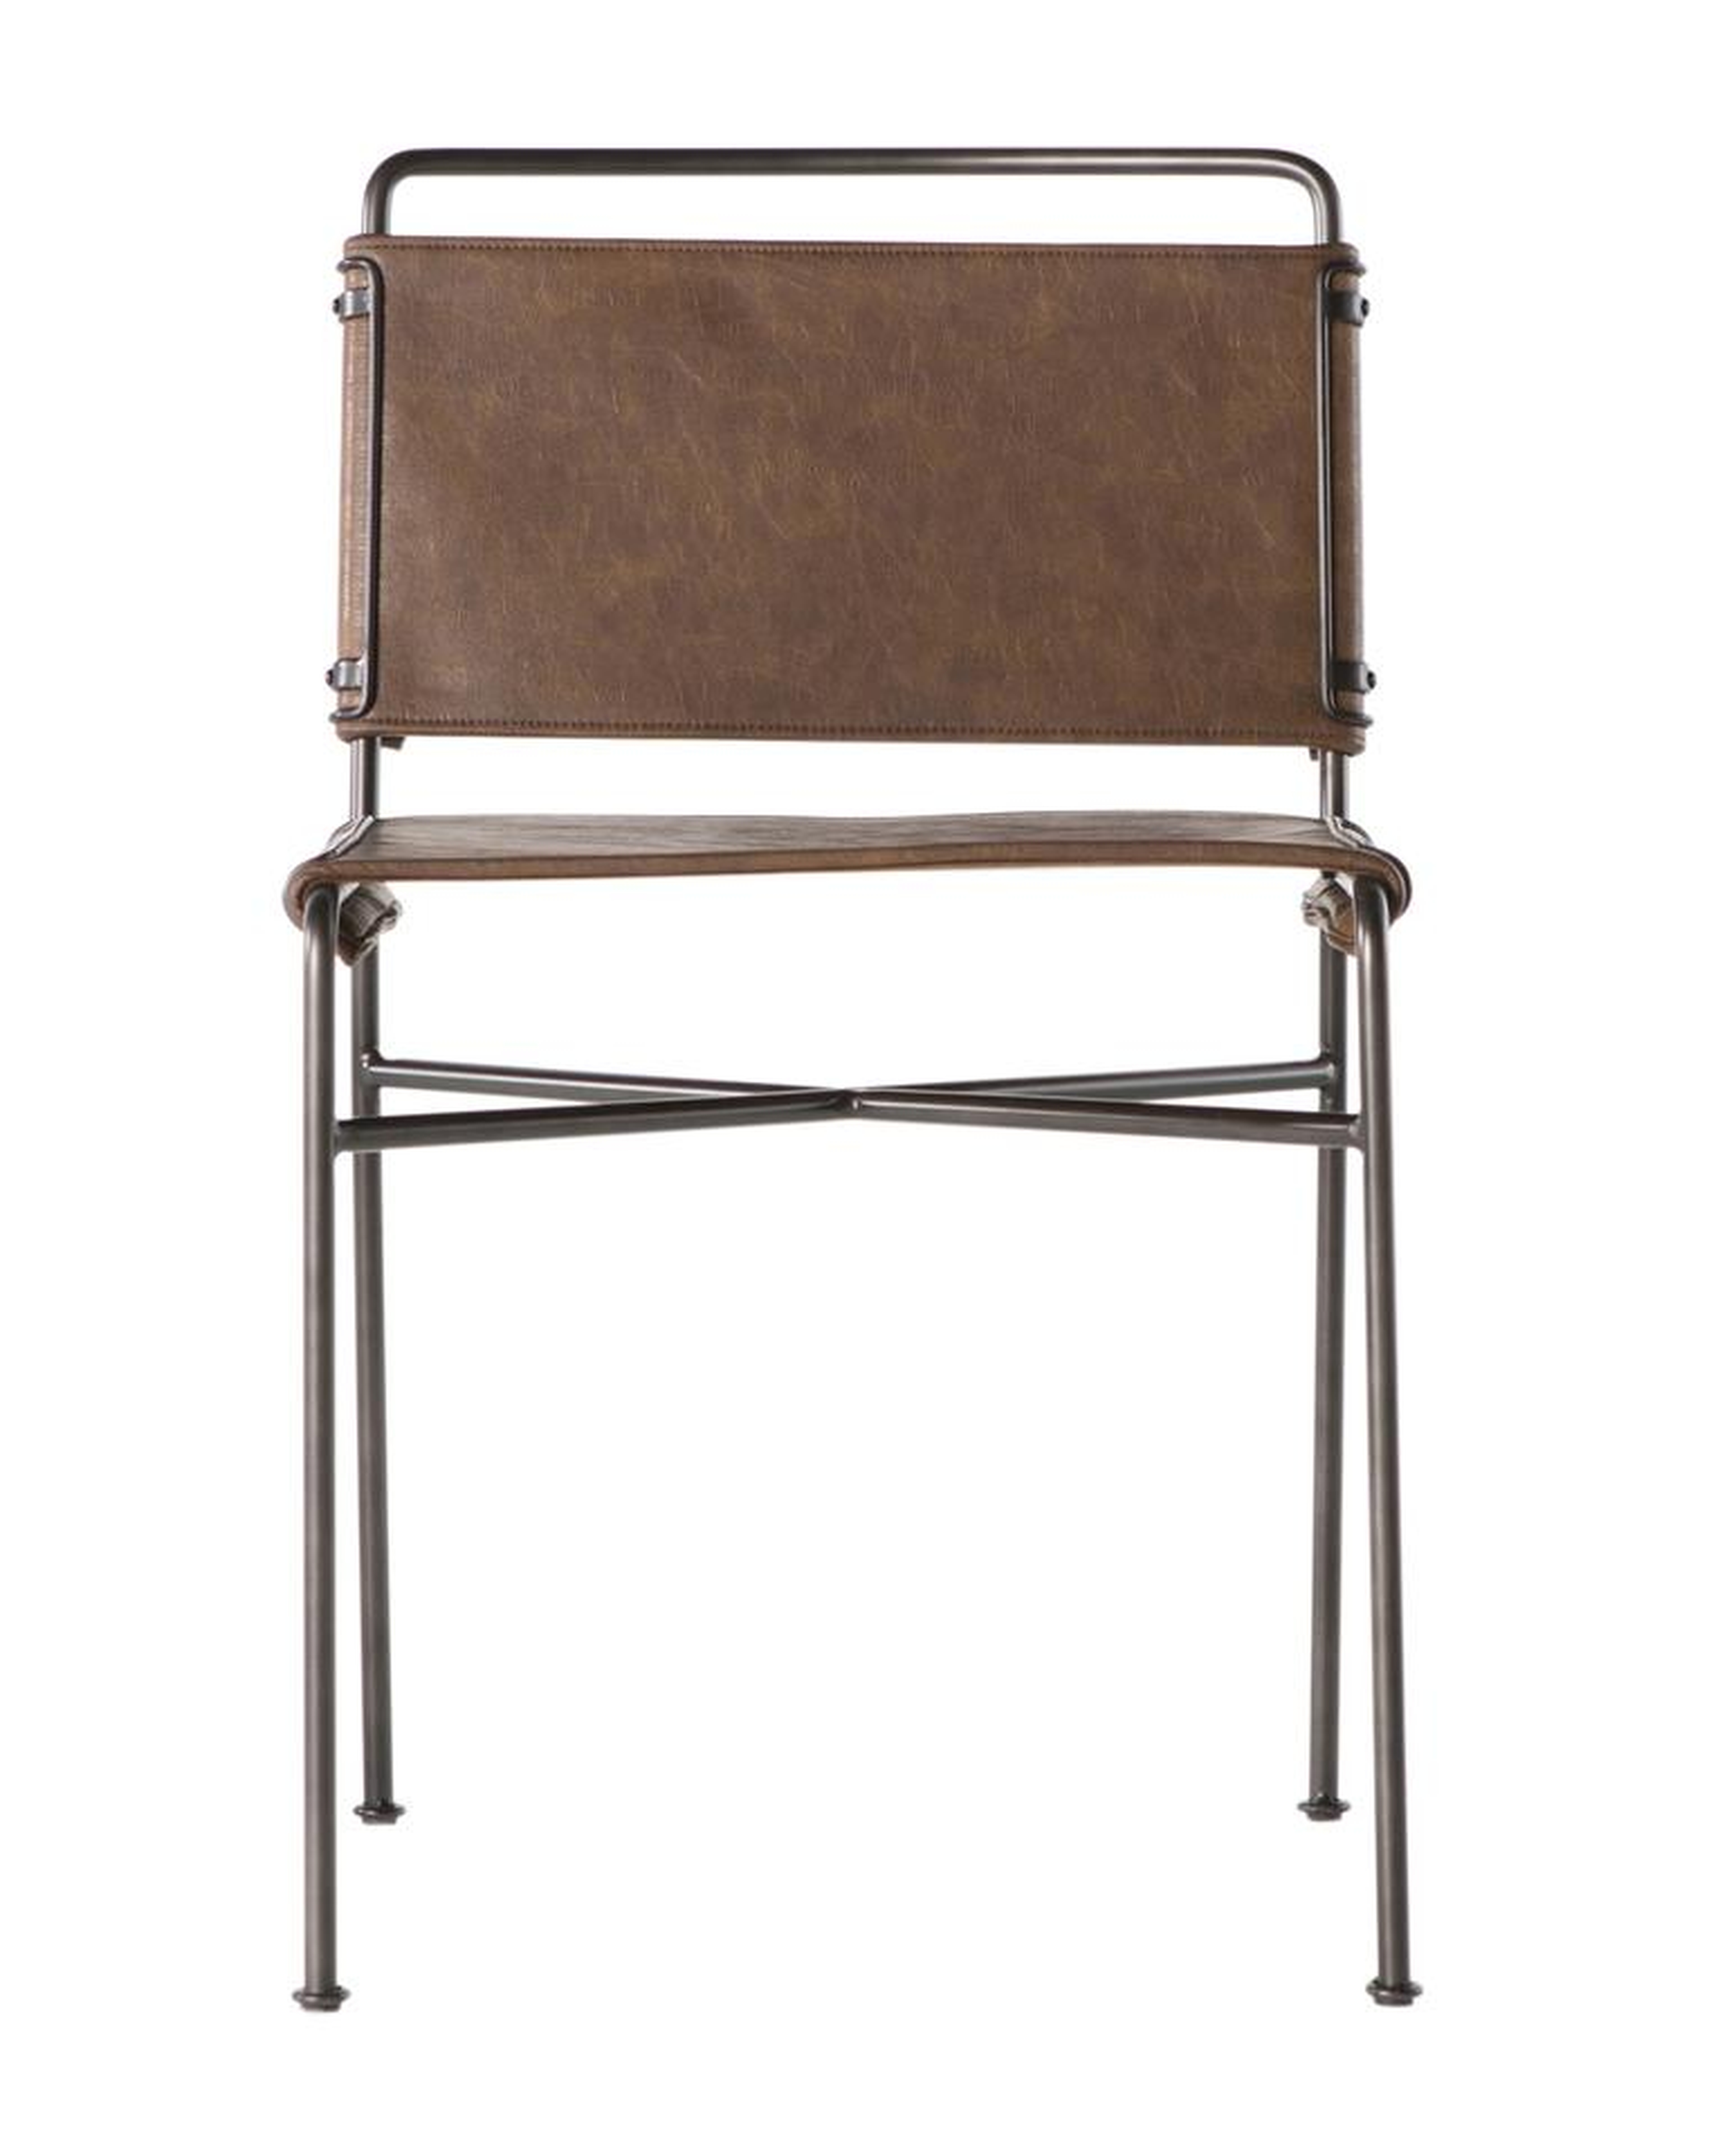 MOORE CHAIR, DISTRESSED BROWN - McGee & Co.